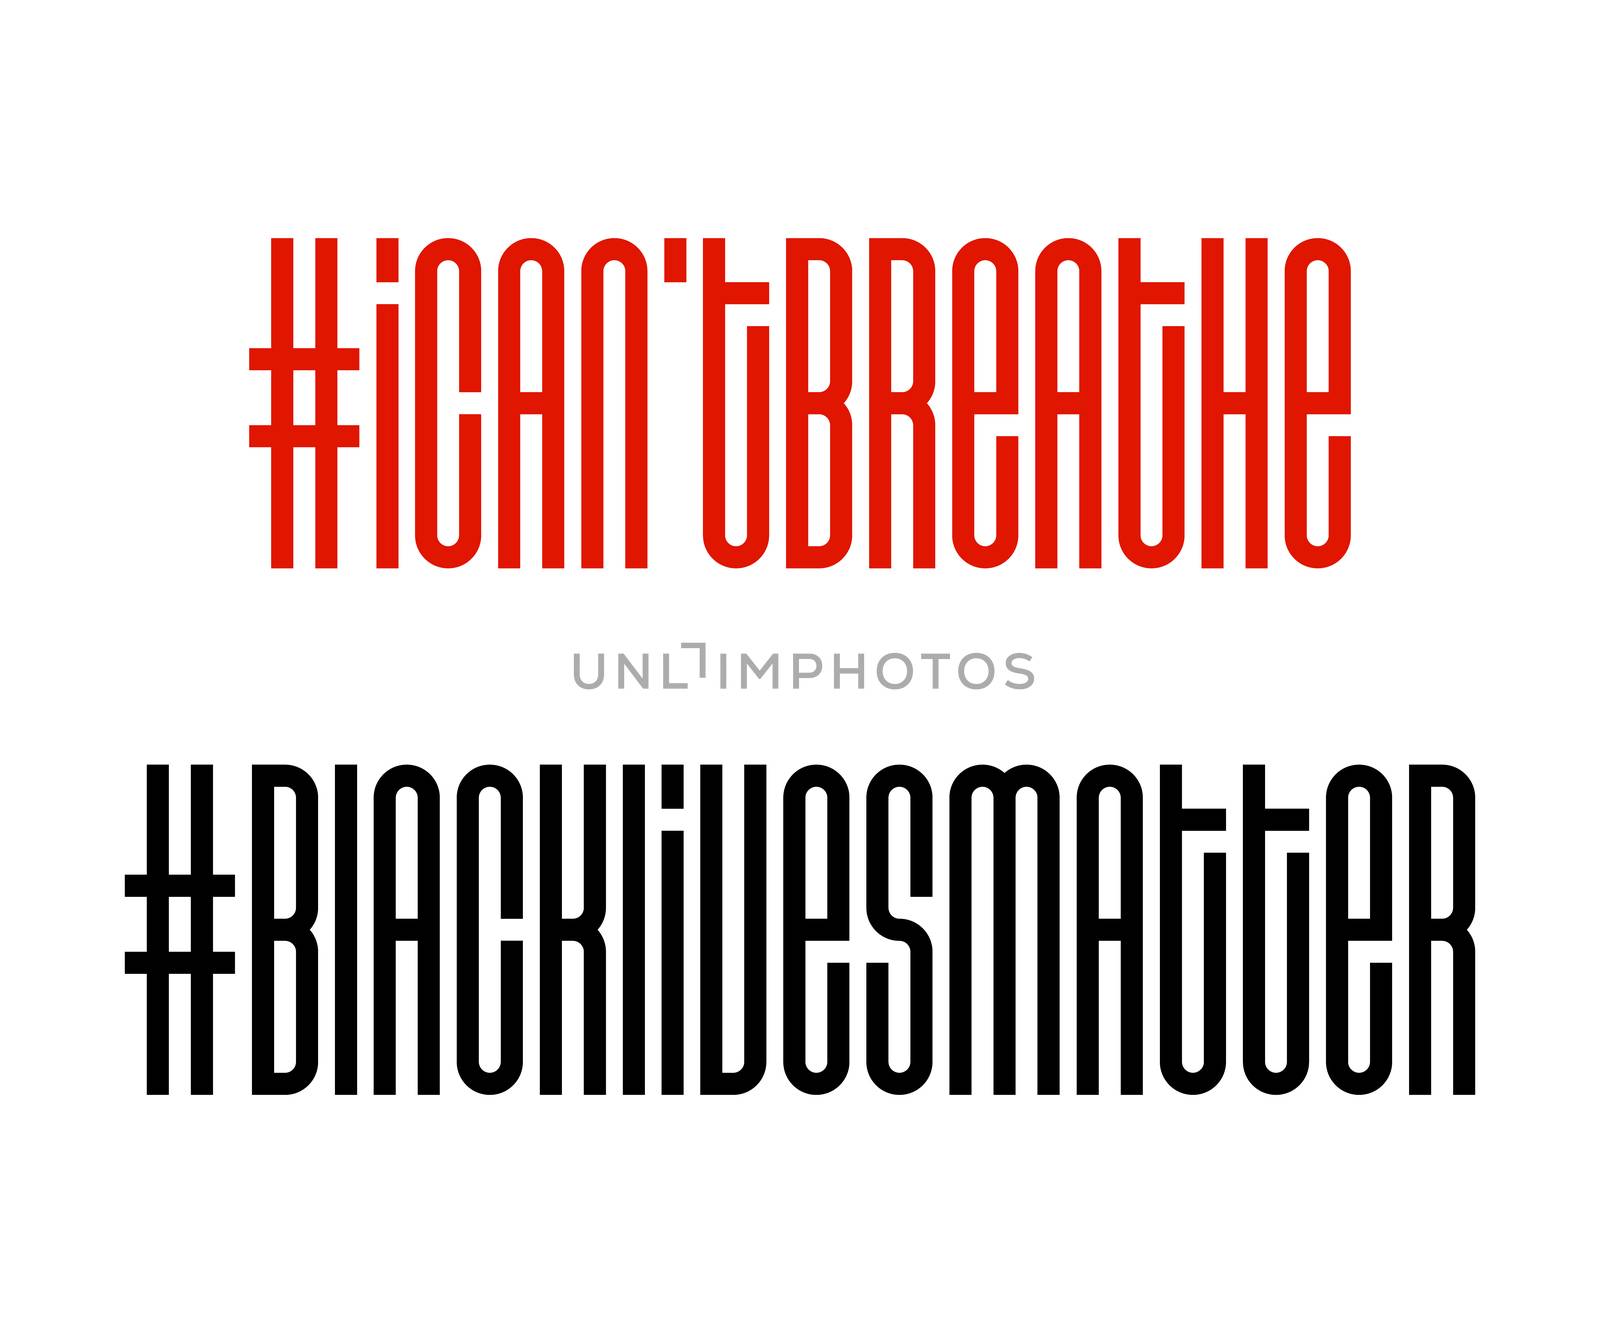 I Can't Breathe and Black Lives Matter. Protest Banner about Human Right of Black People in U.S. America. Vector Illustration. Icon Poster and Symbol.